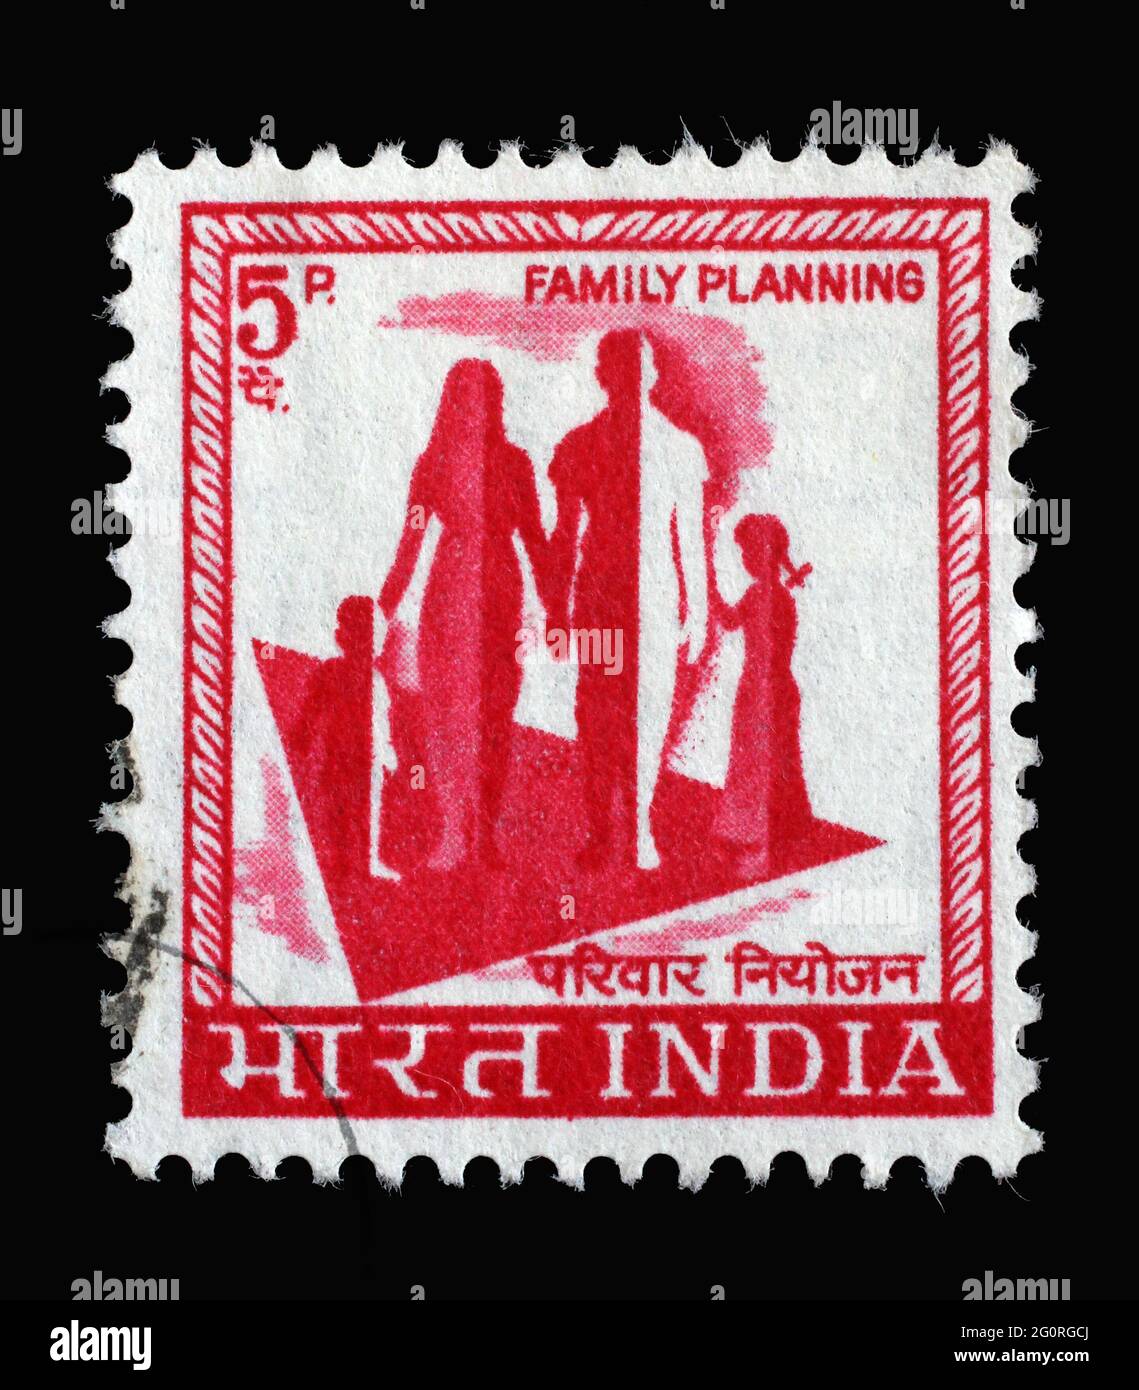 Stamp printed in India shows silhouette of a family to commemorate family planning campaign, circa 1967 Stock Photo